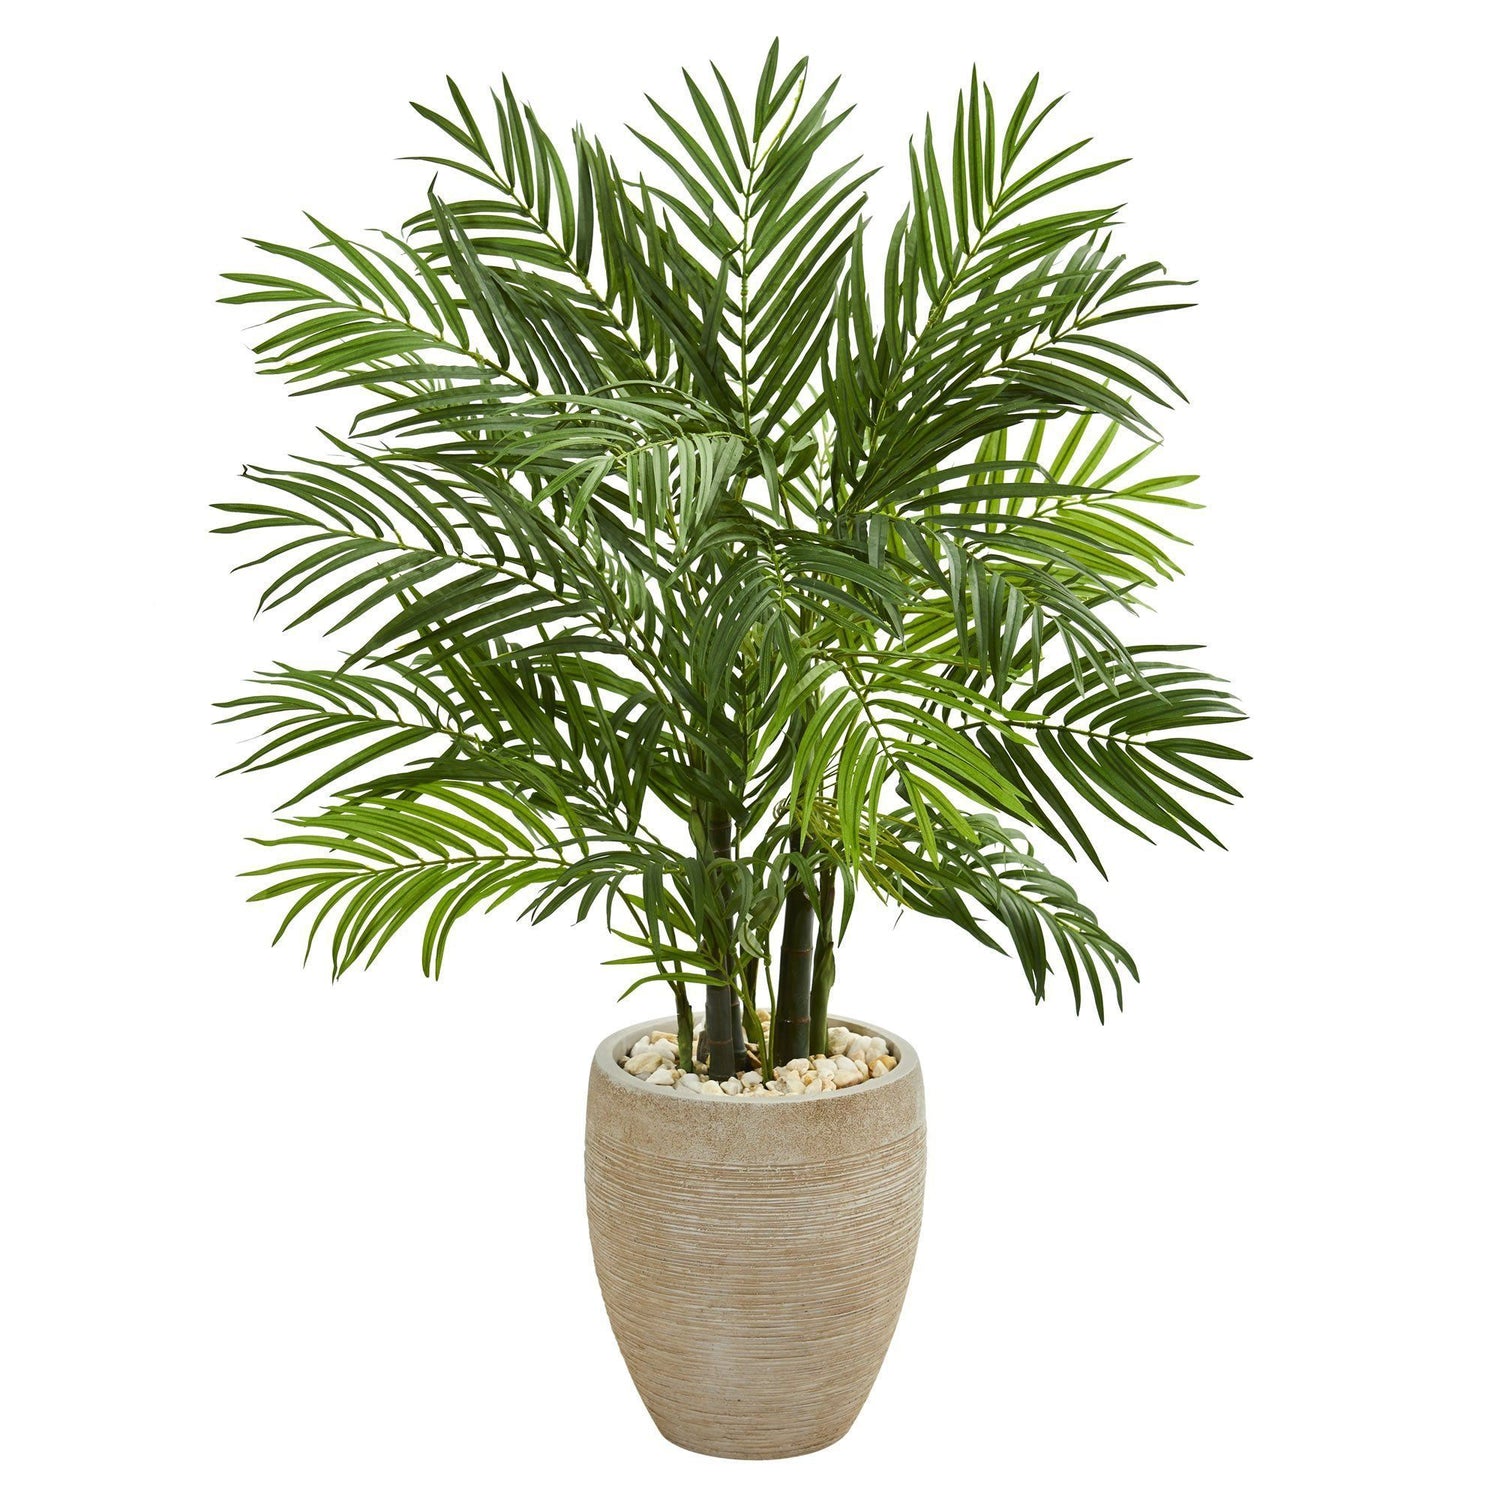 4’ Areca Palm Artificial Tree in Sand Colored Planter